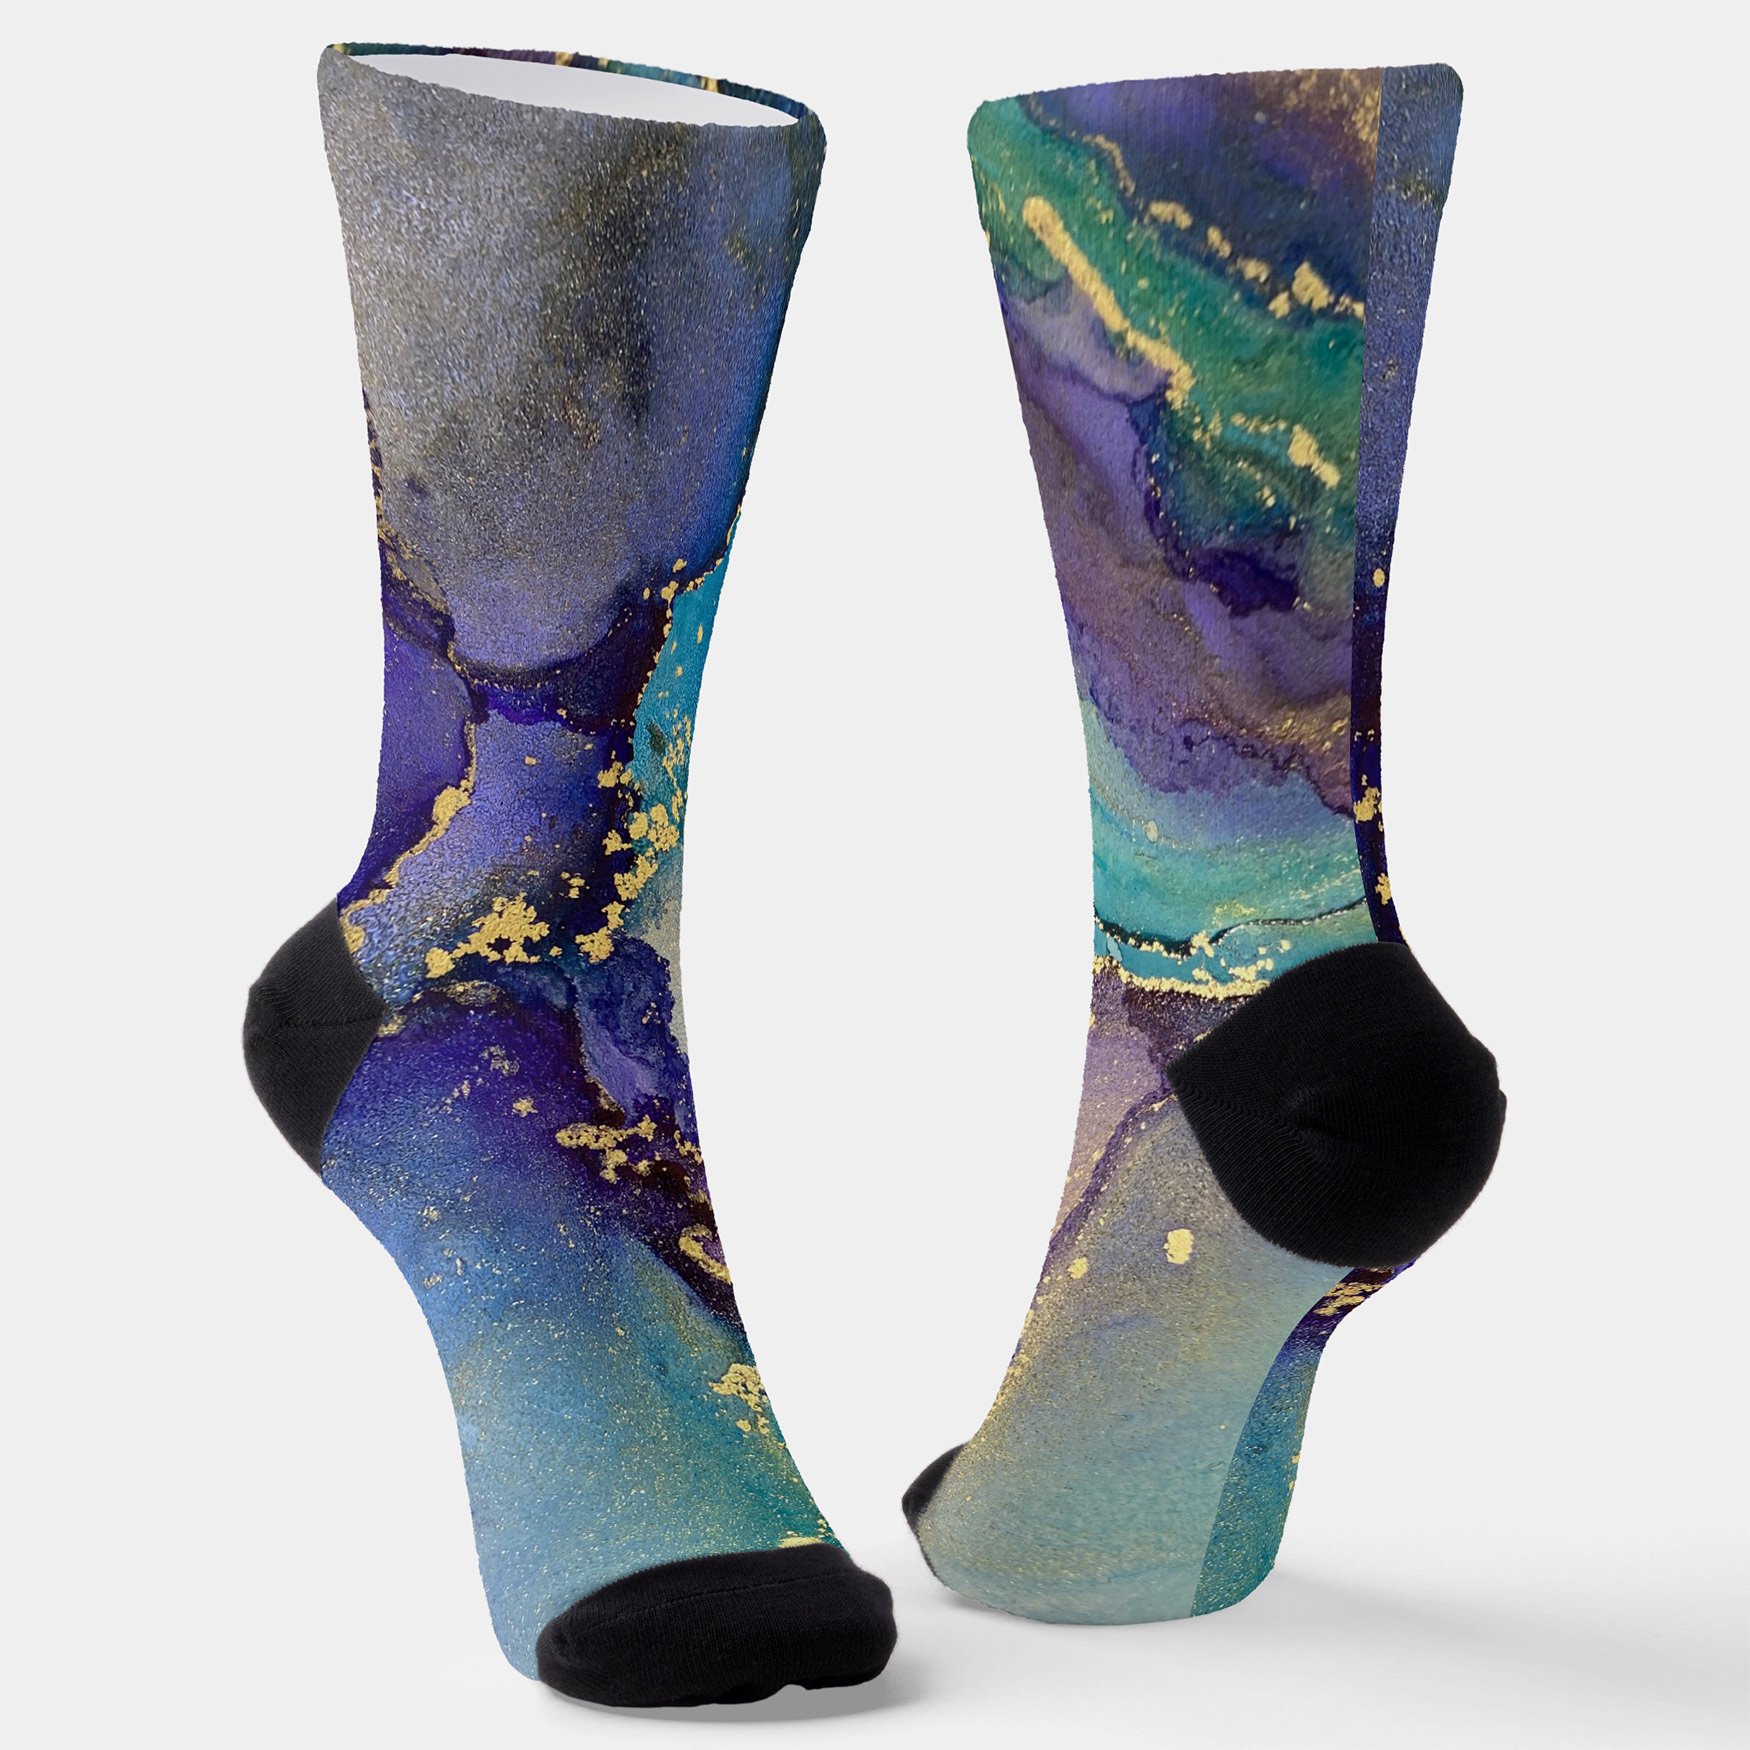 Zazzle-Multicolored-Gold-Alcohol-Ink-Liquid-Abstract-Art-Whimsical-Socks.jpg